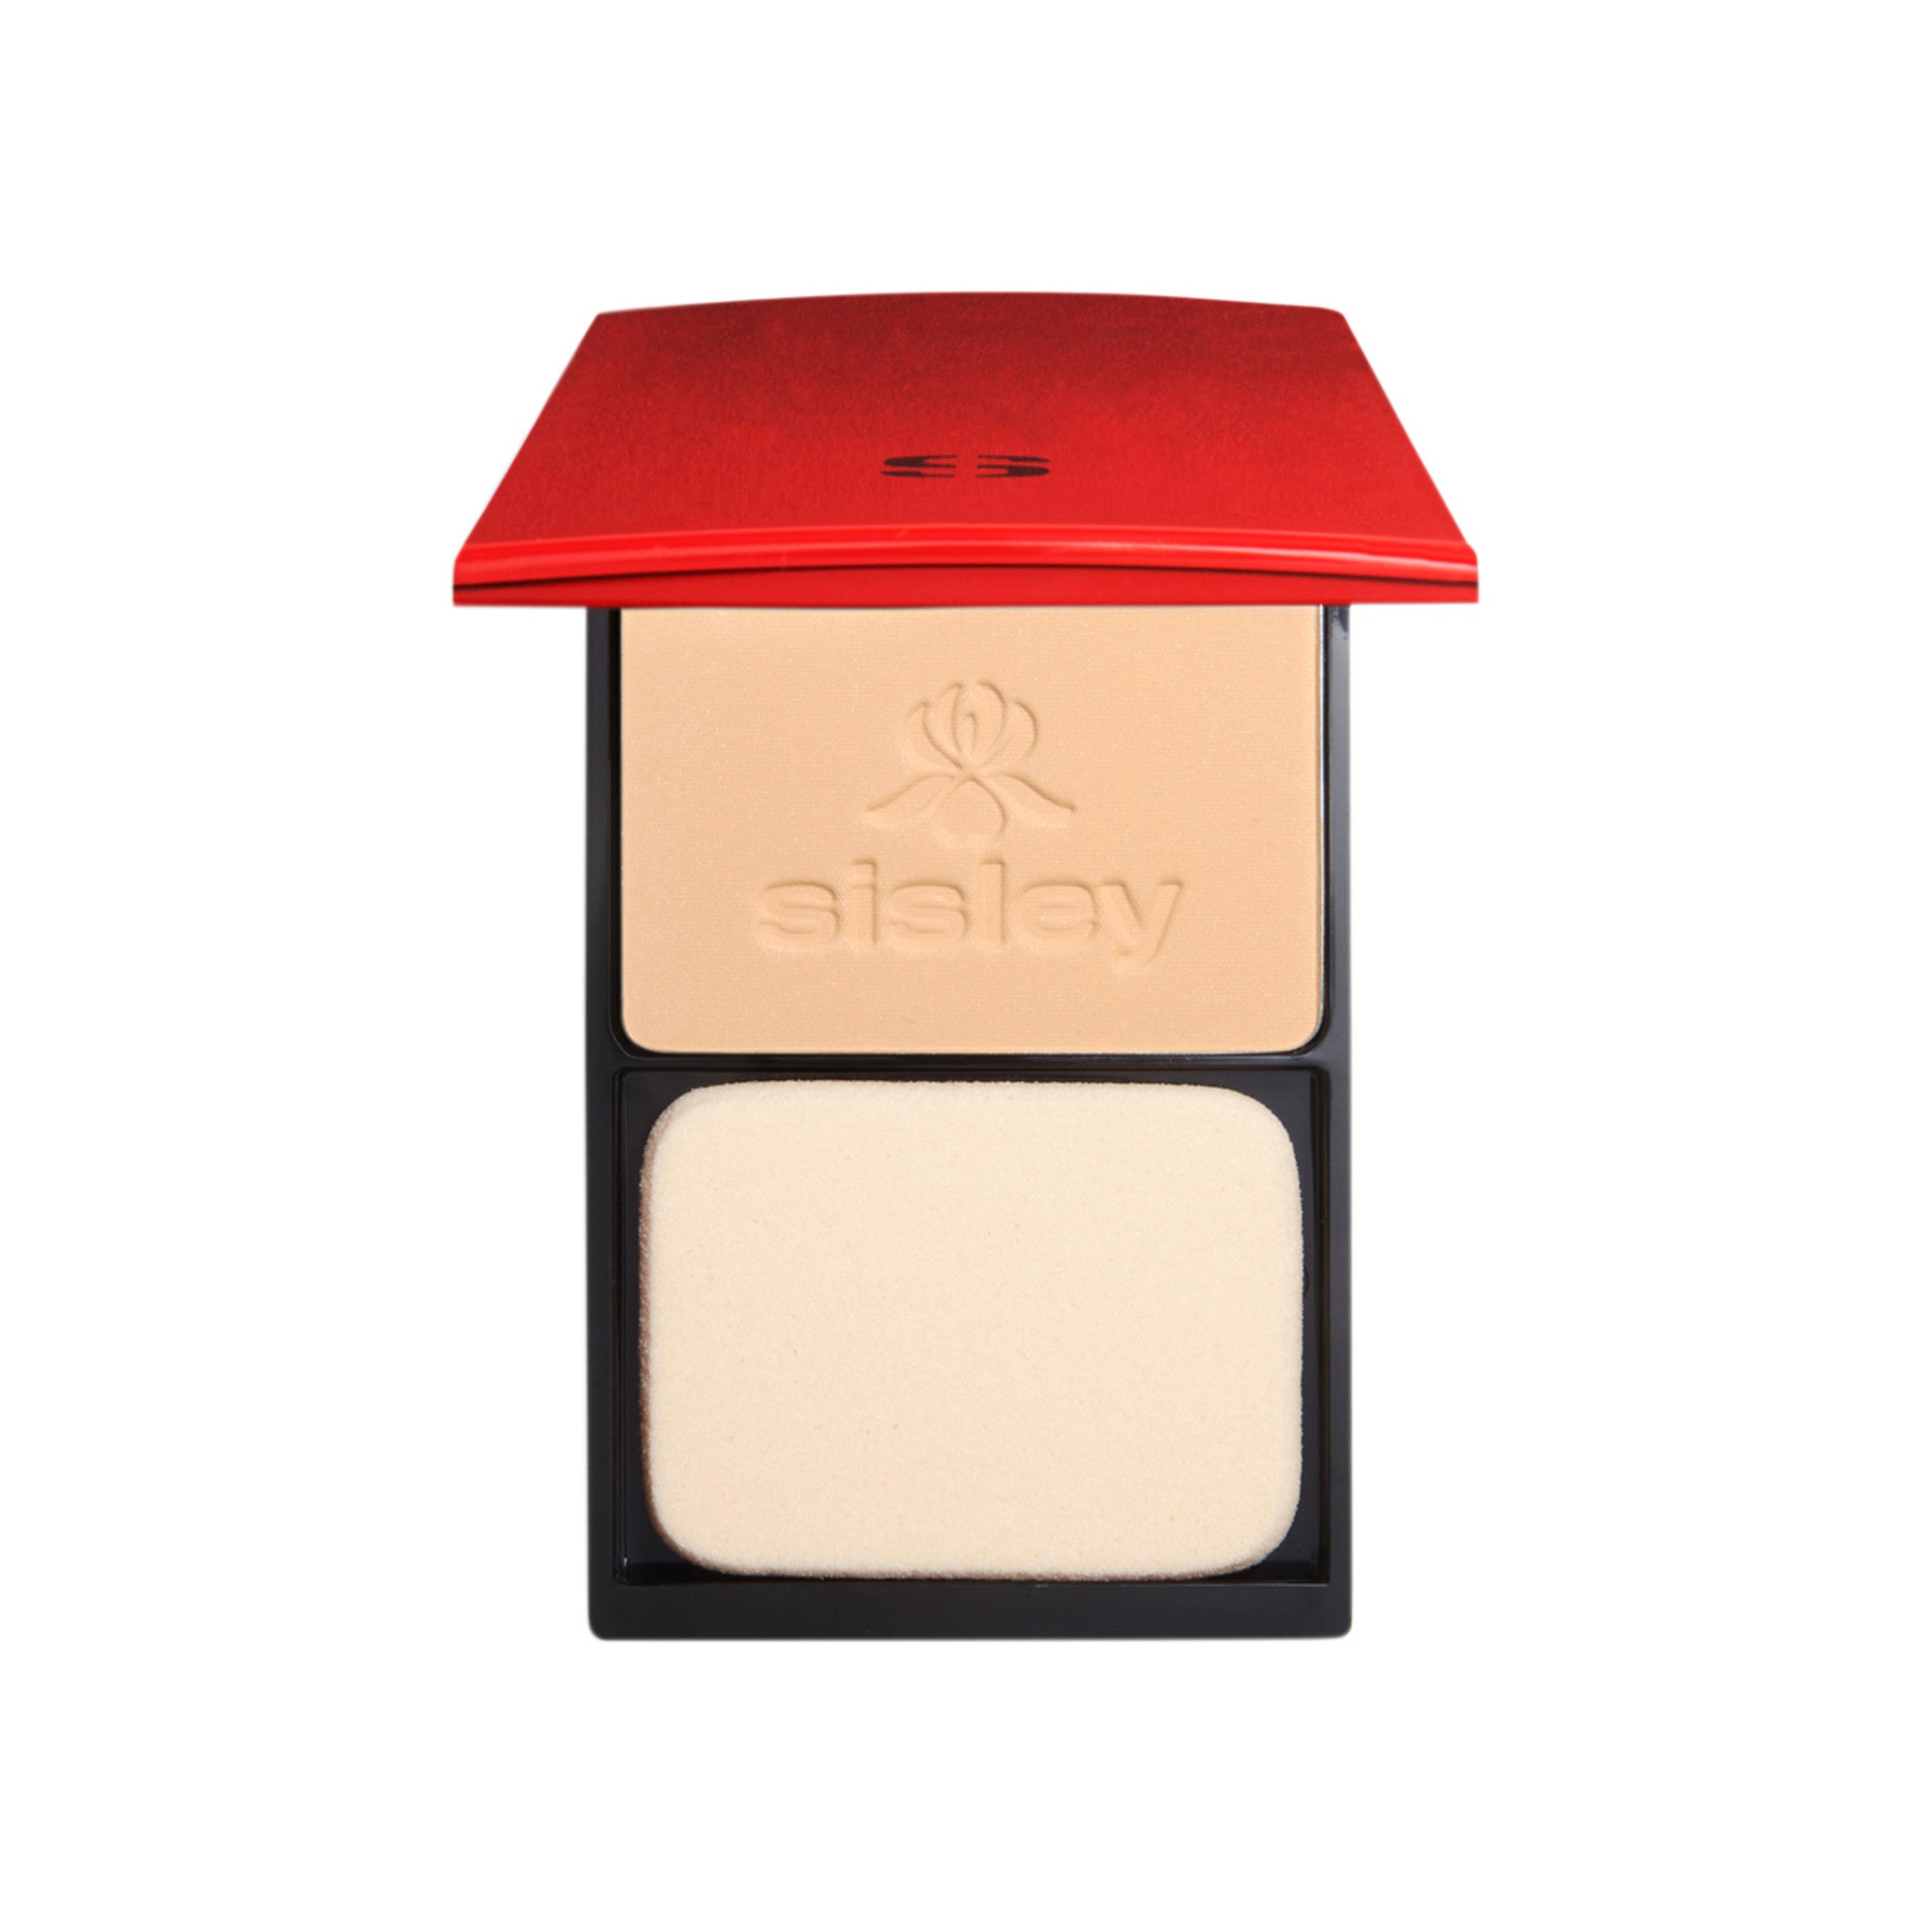 Phyto-Teint Eclat Compact Foundation main image.